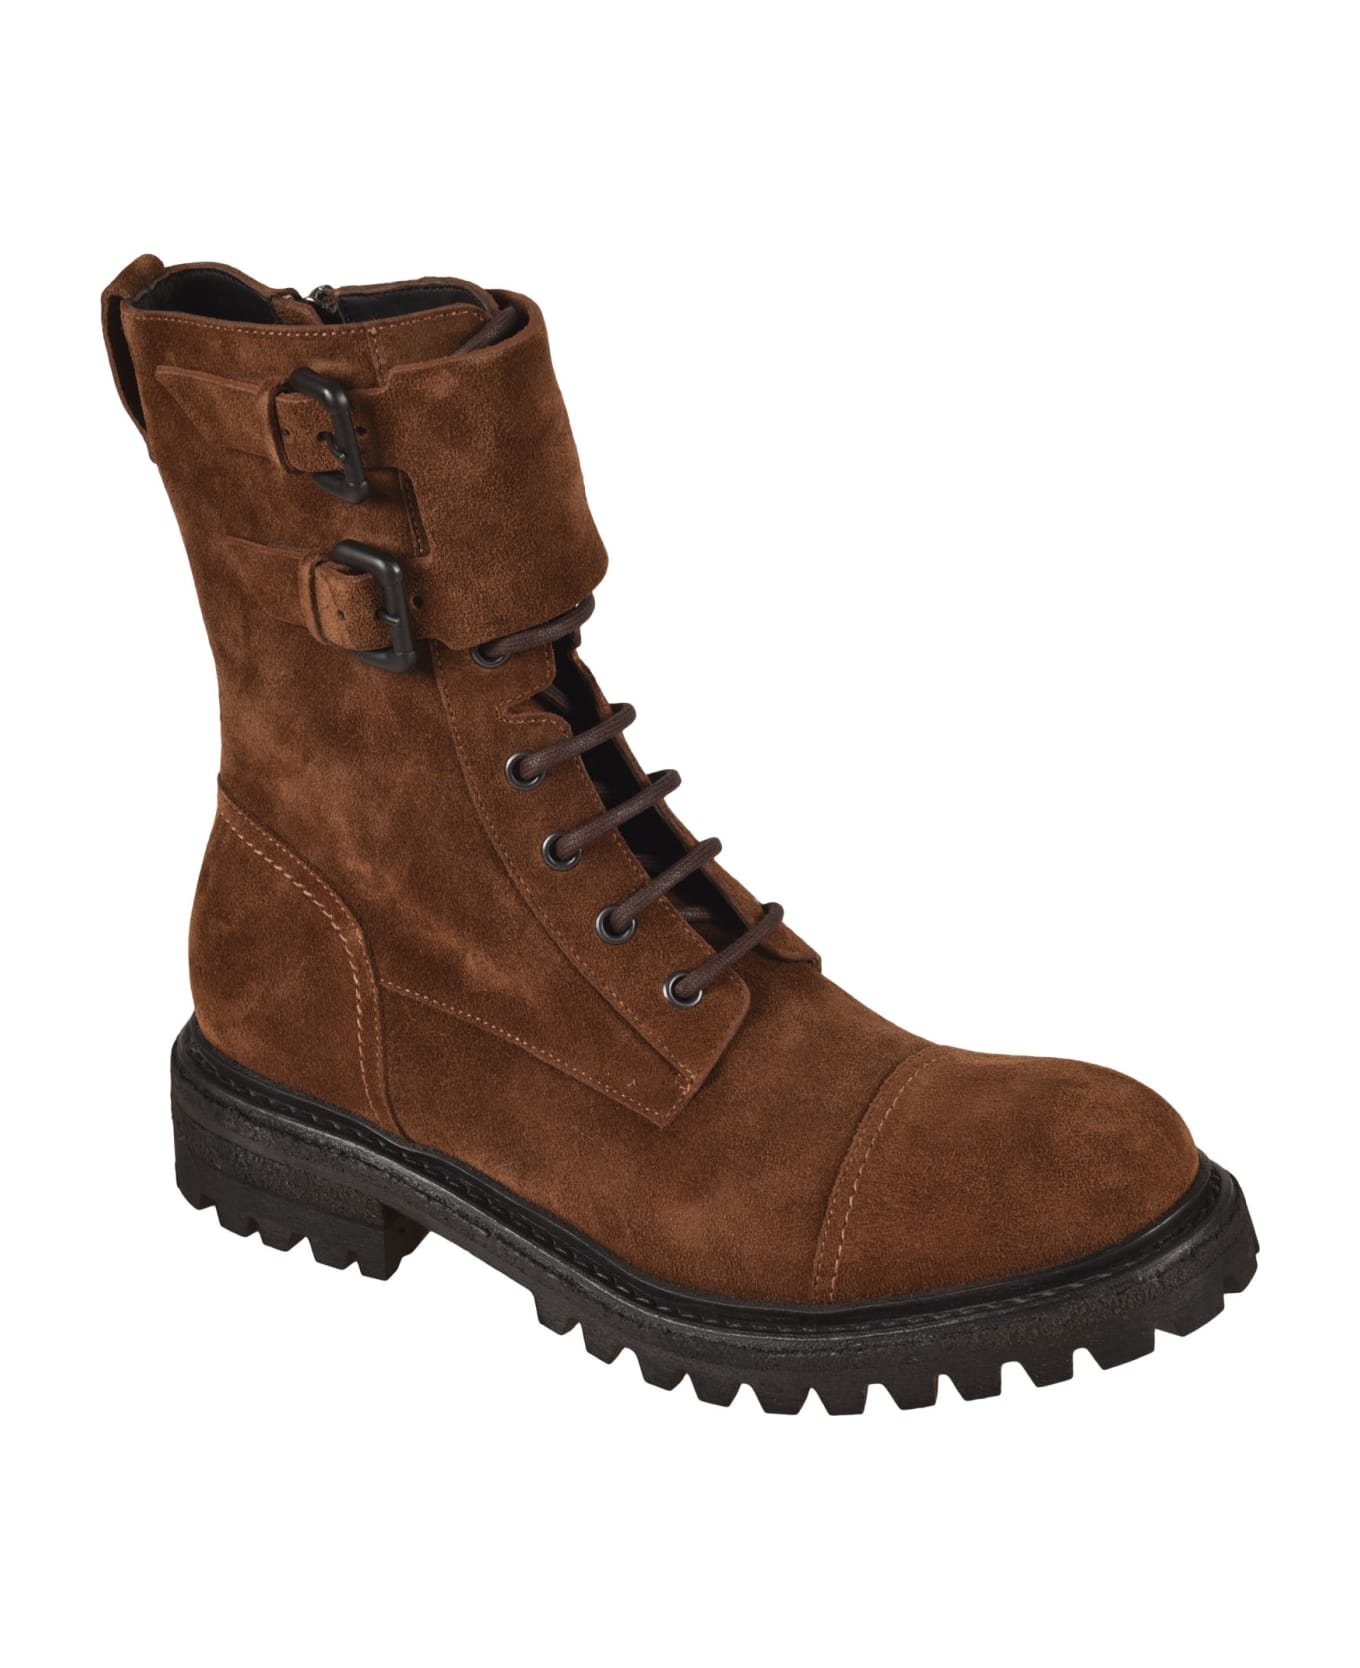 Del Carlo Take Kaleido Lace-up Boots - Brown ブーツ